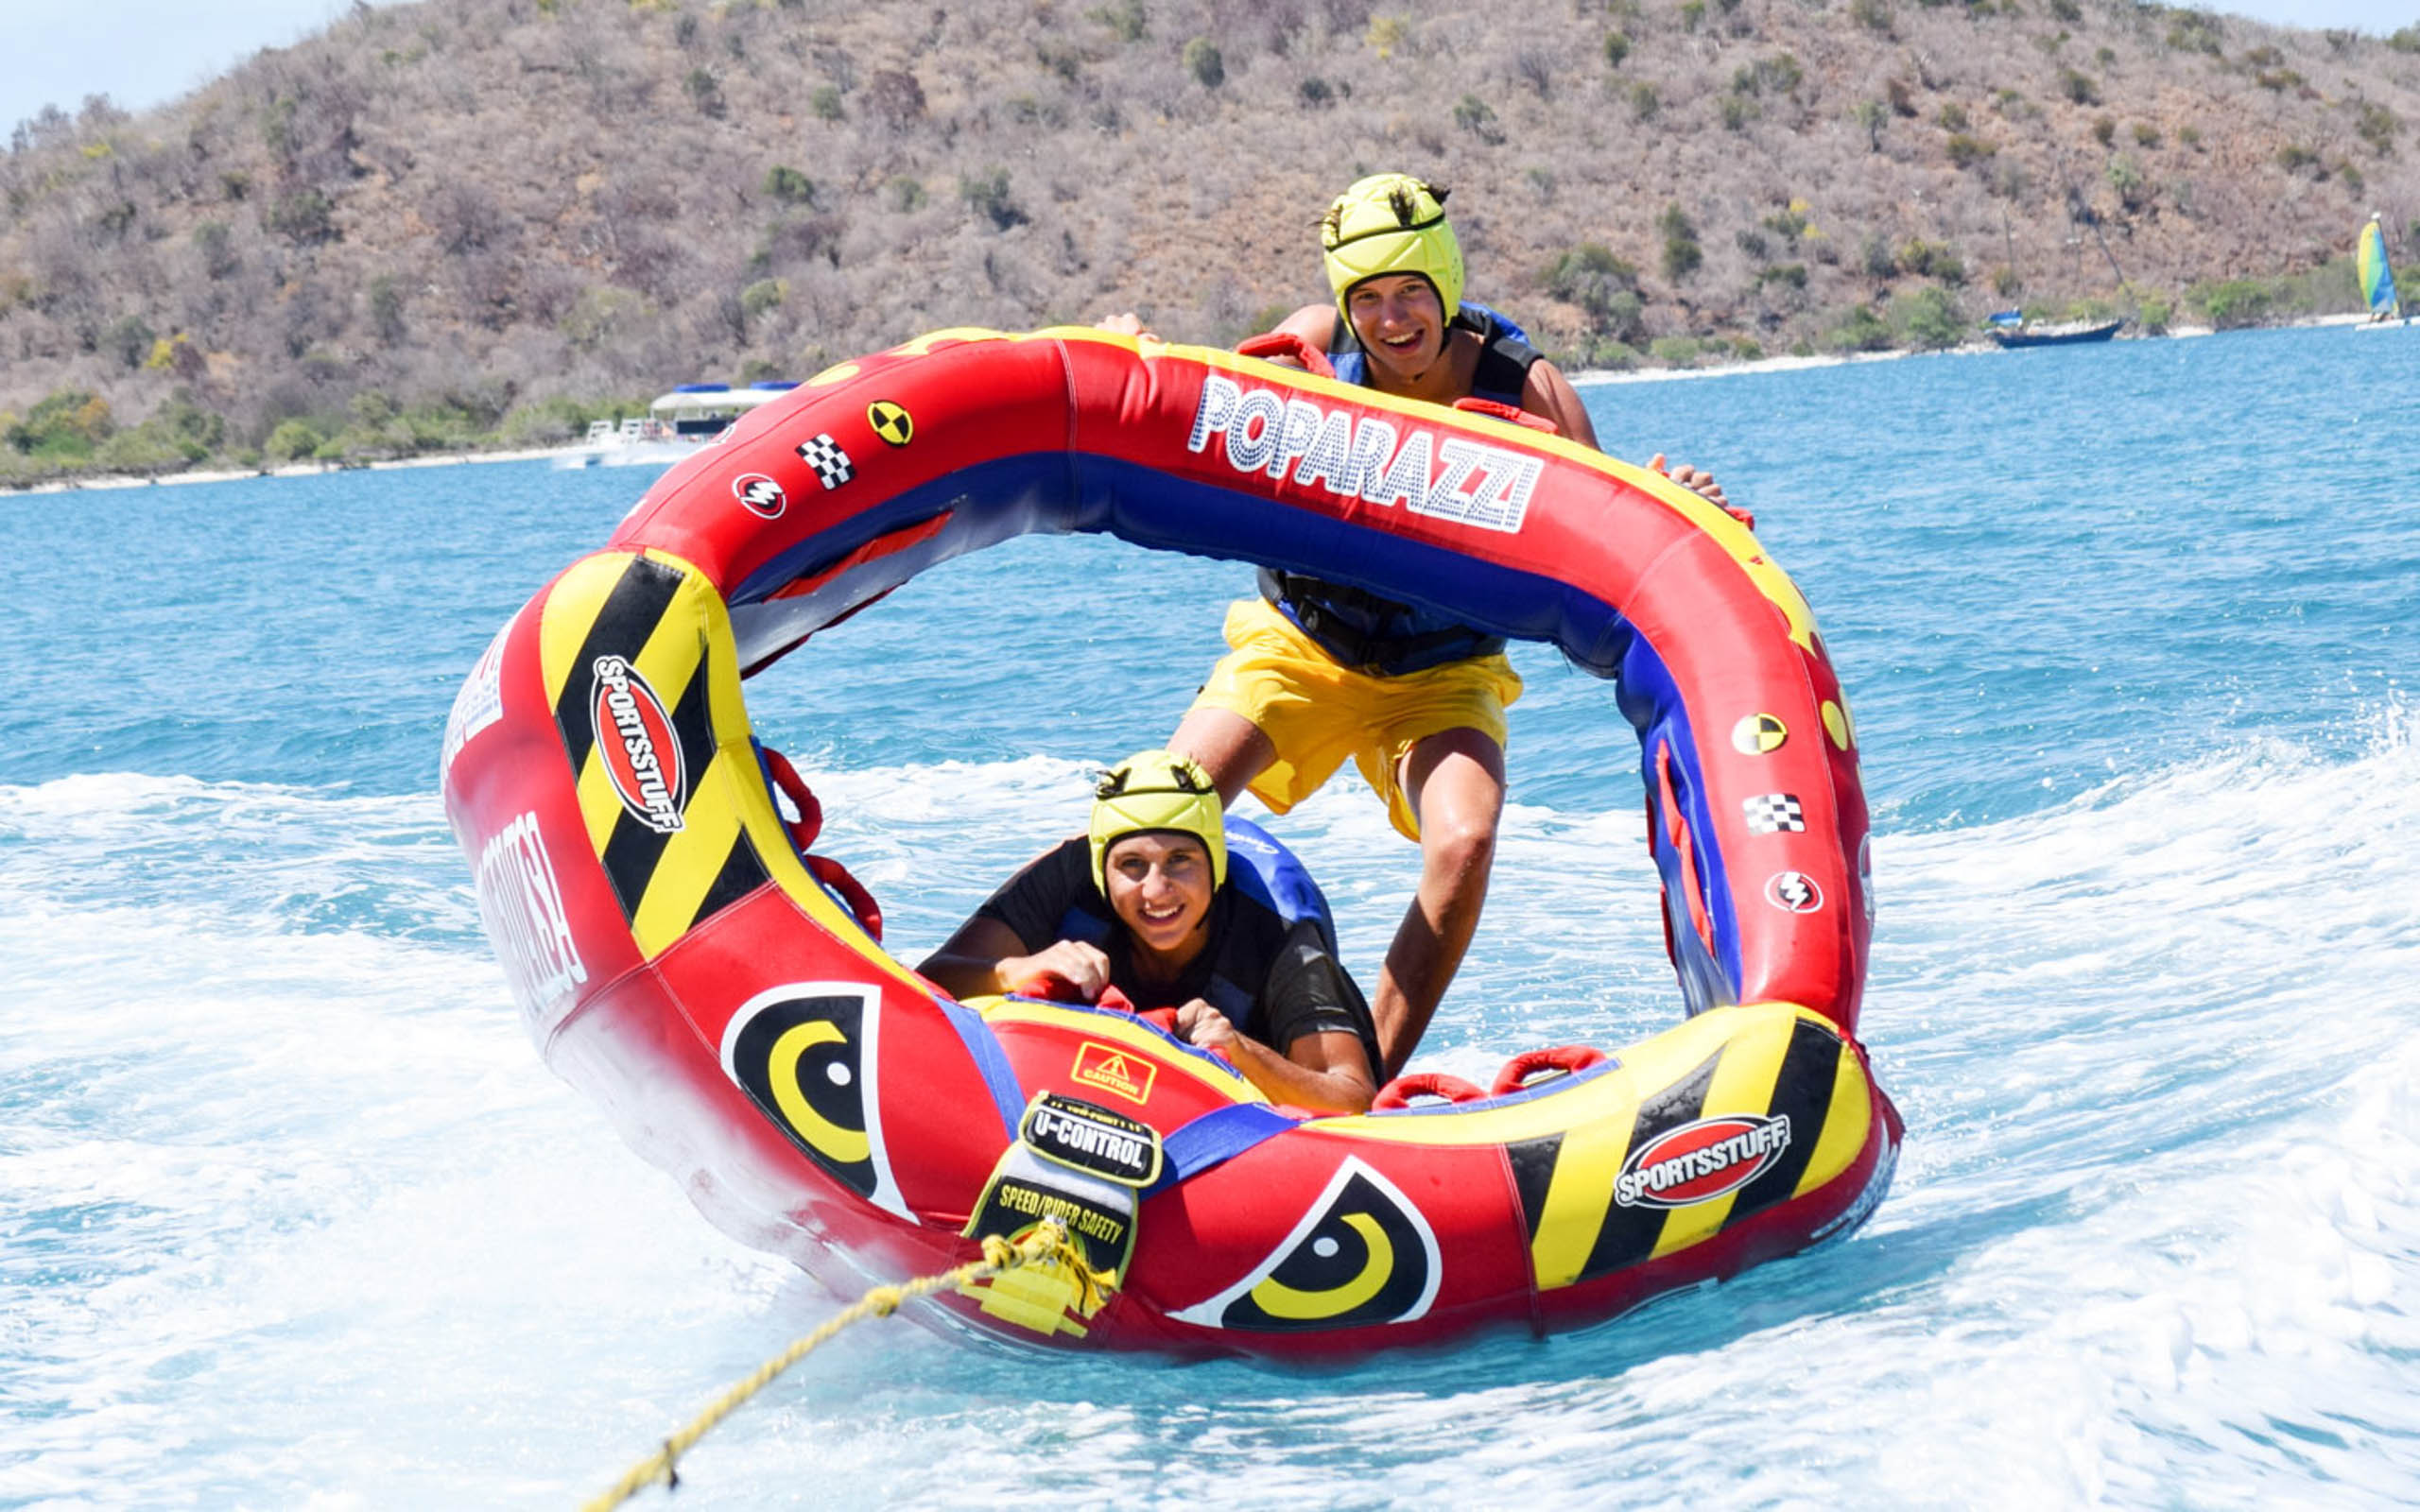 Two people riding a water raft in the ocean.